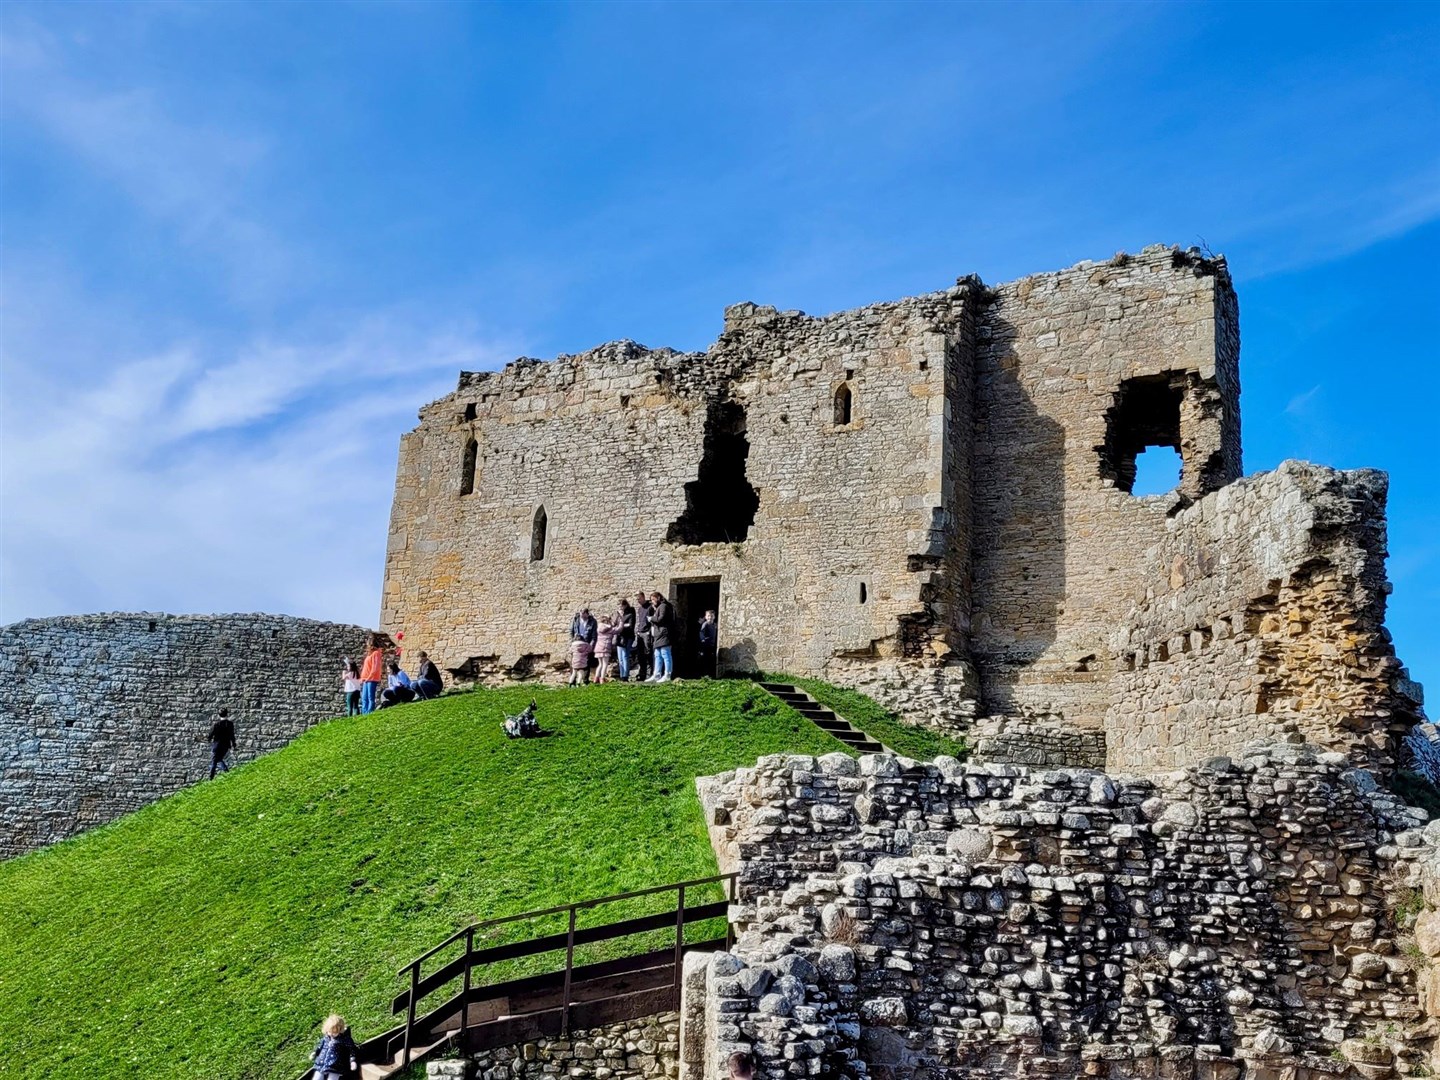 Duffus Castle is a popular spot for the Easter tradition, due to its hilly location. Picture: Hazel Thomson